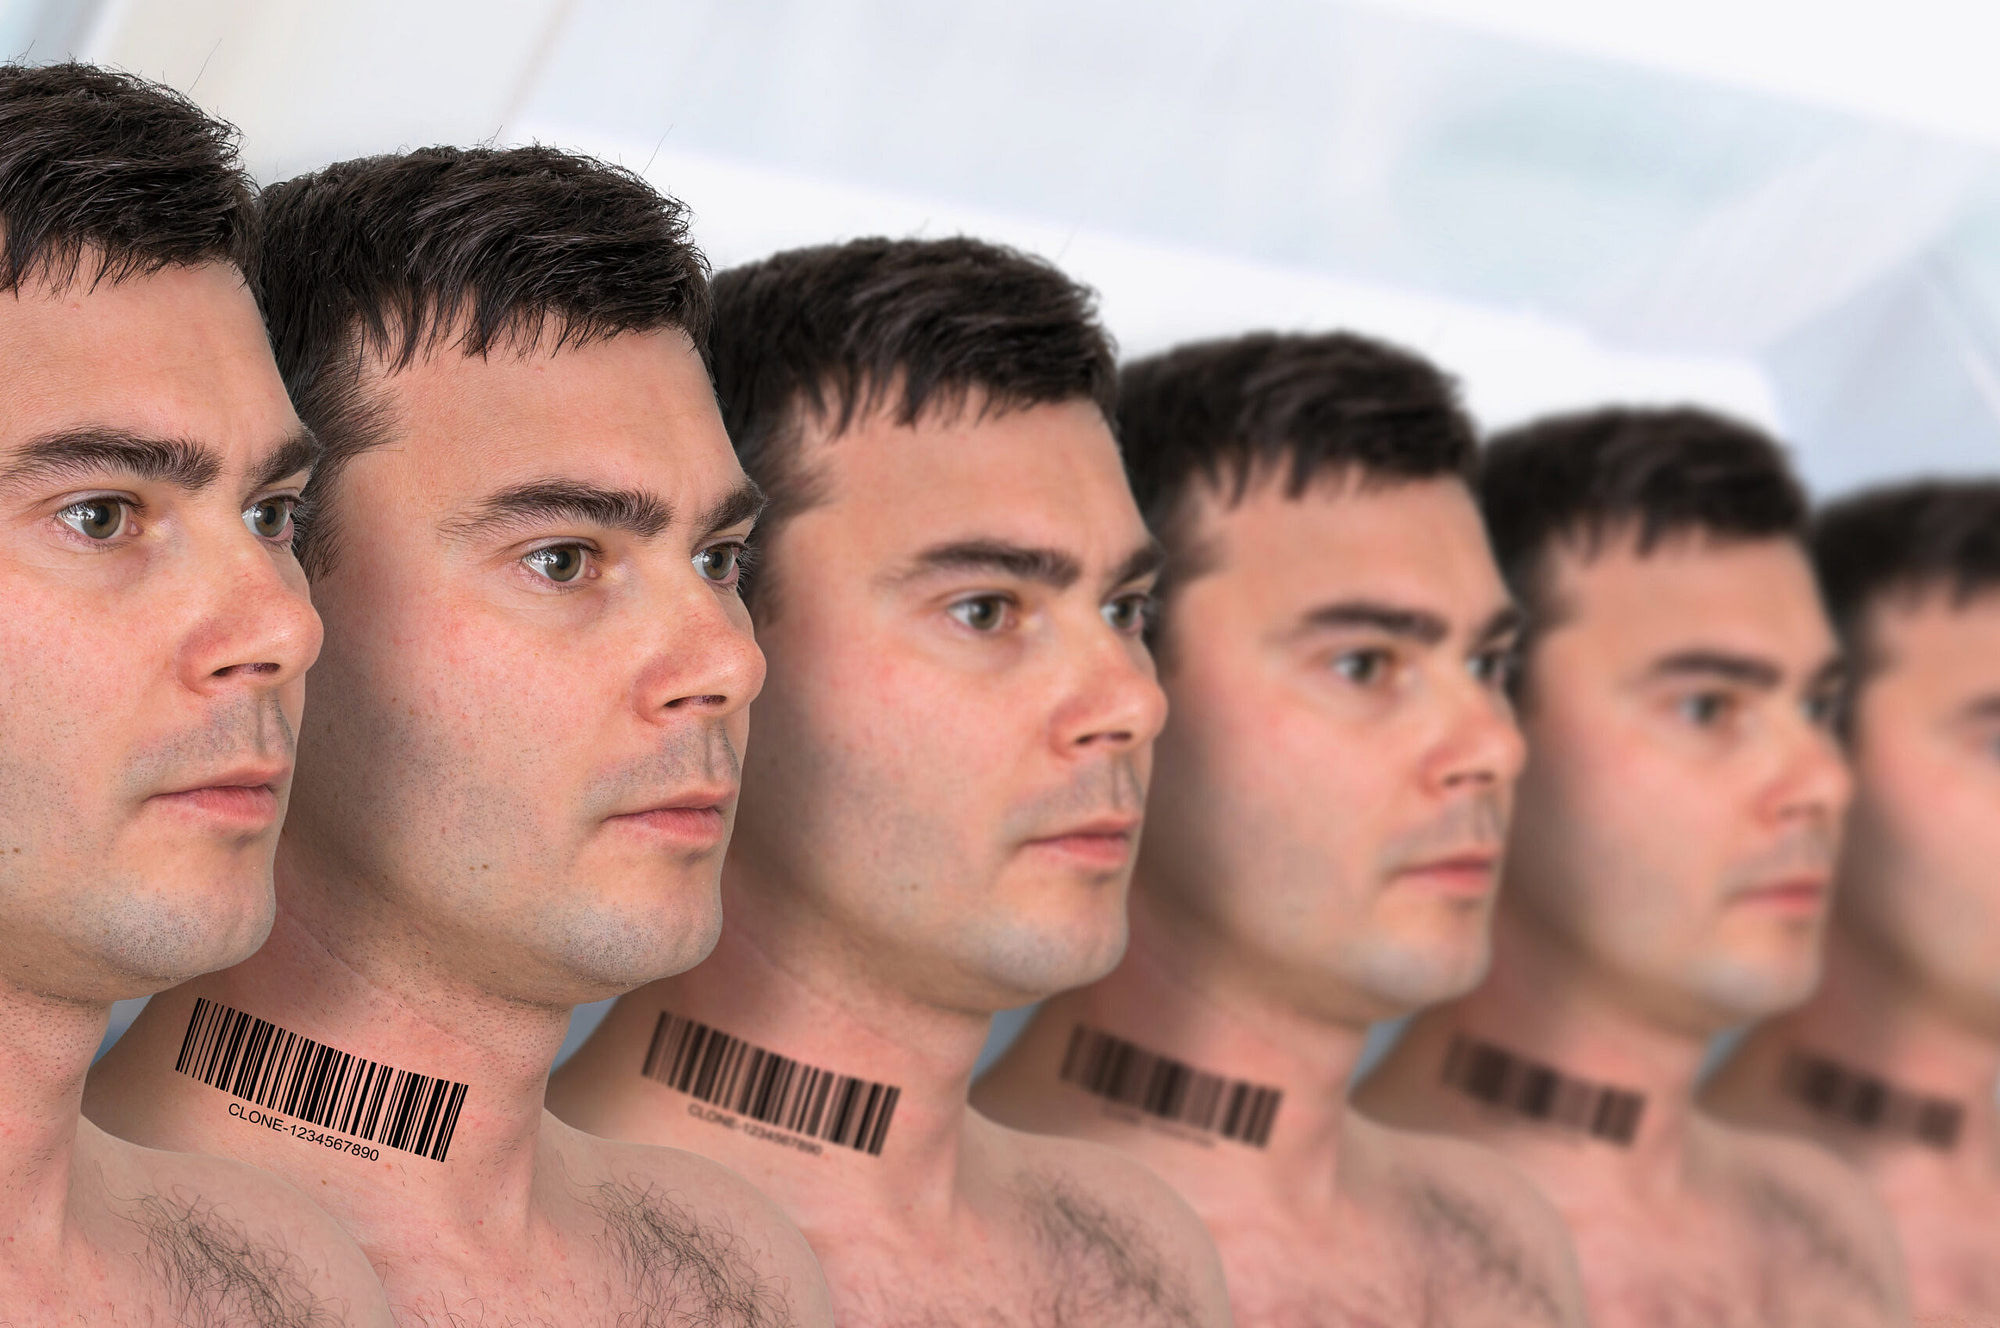 Why Exactly Was The Human Cloning Banned?